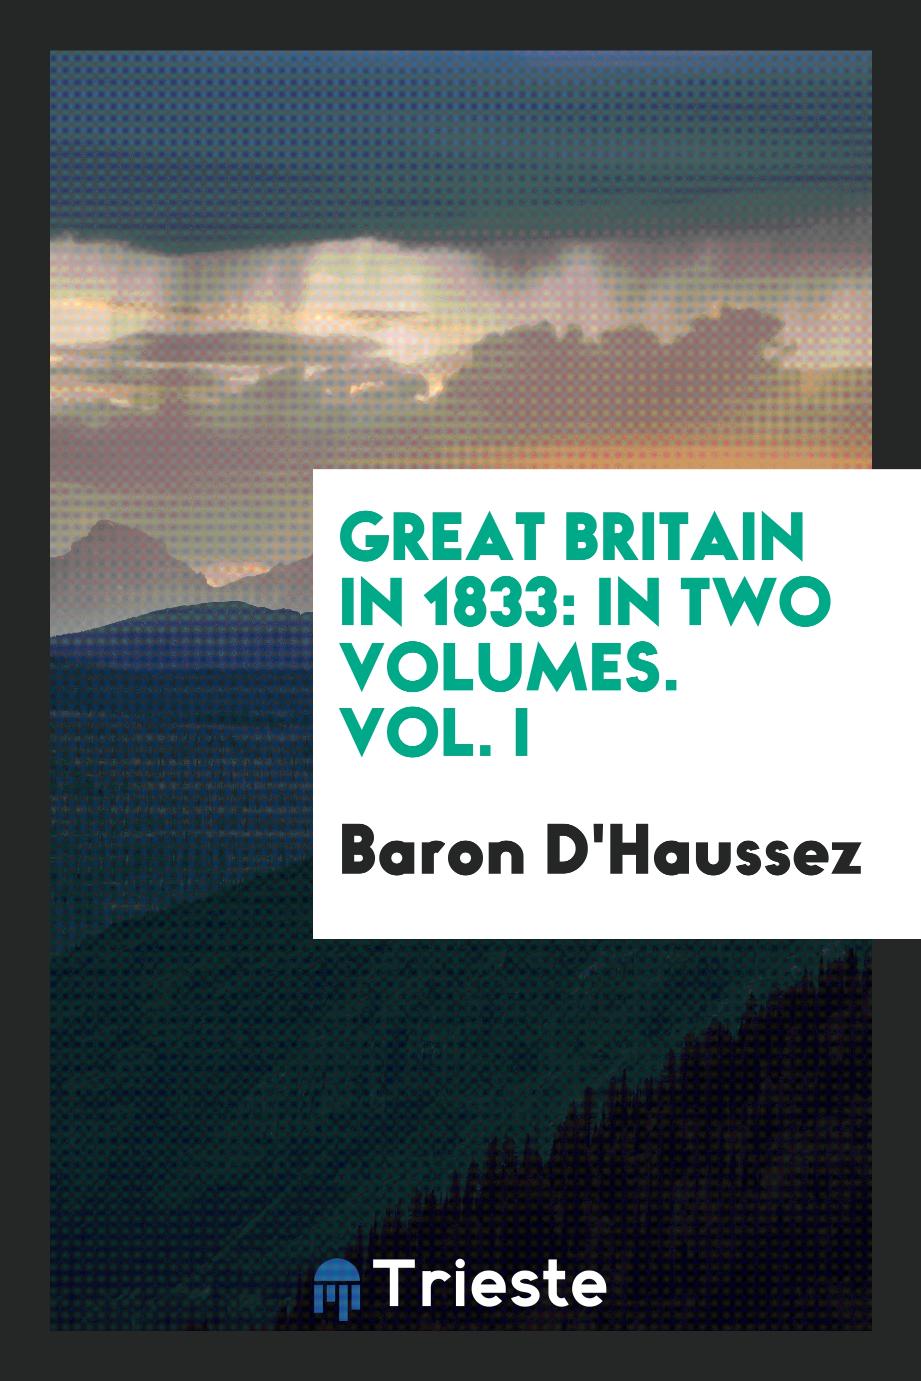 Great Britain in 1833: In Two Volumes. Vol. I